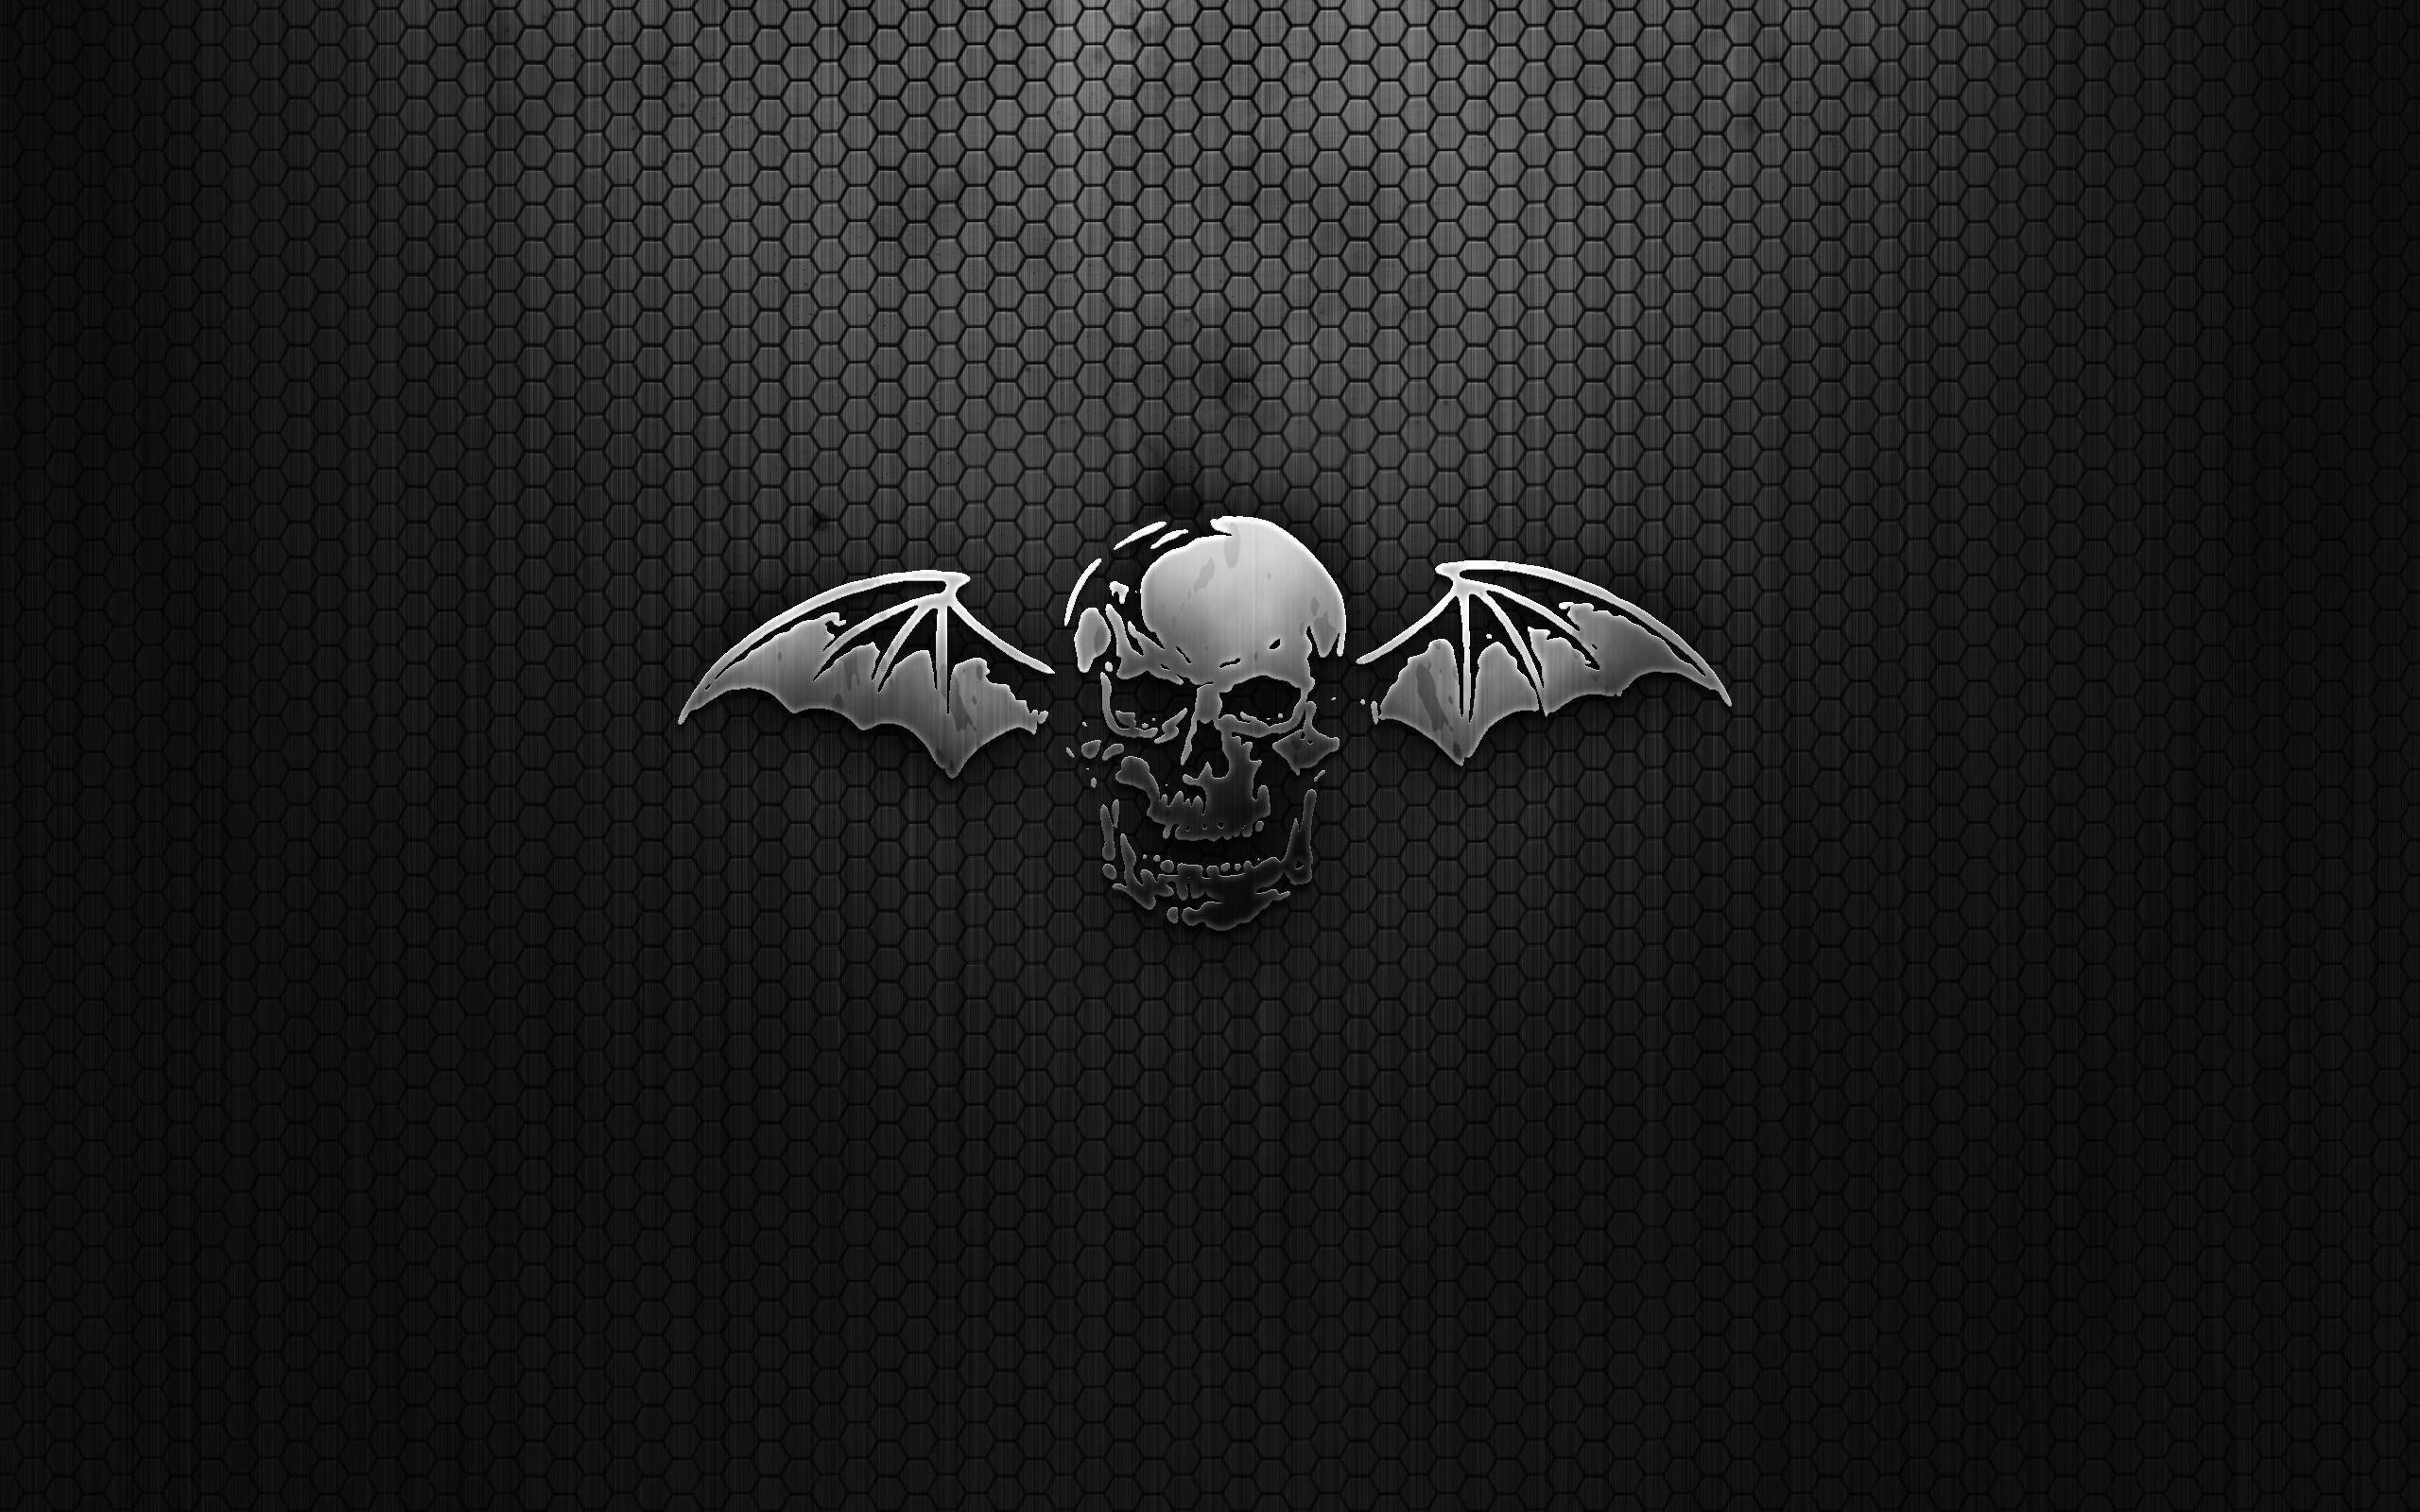 2560x1600 Download the Avenged Sevenfold Wallpaper, Avenged Sevenfold iPhone .